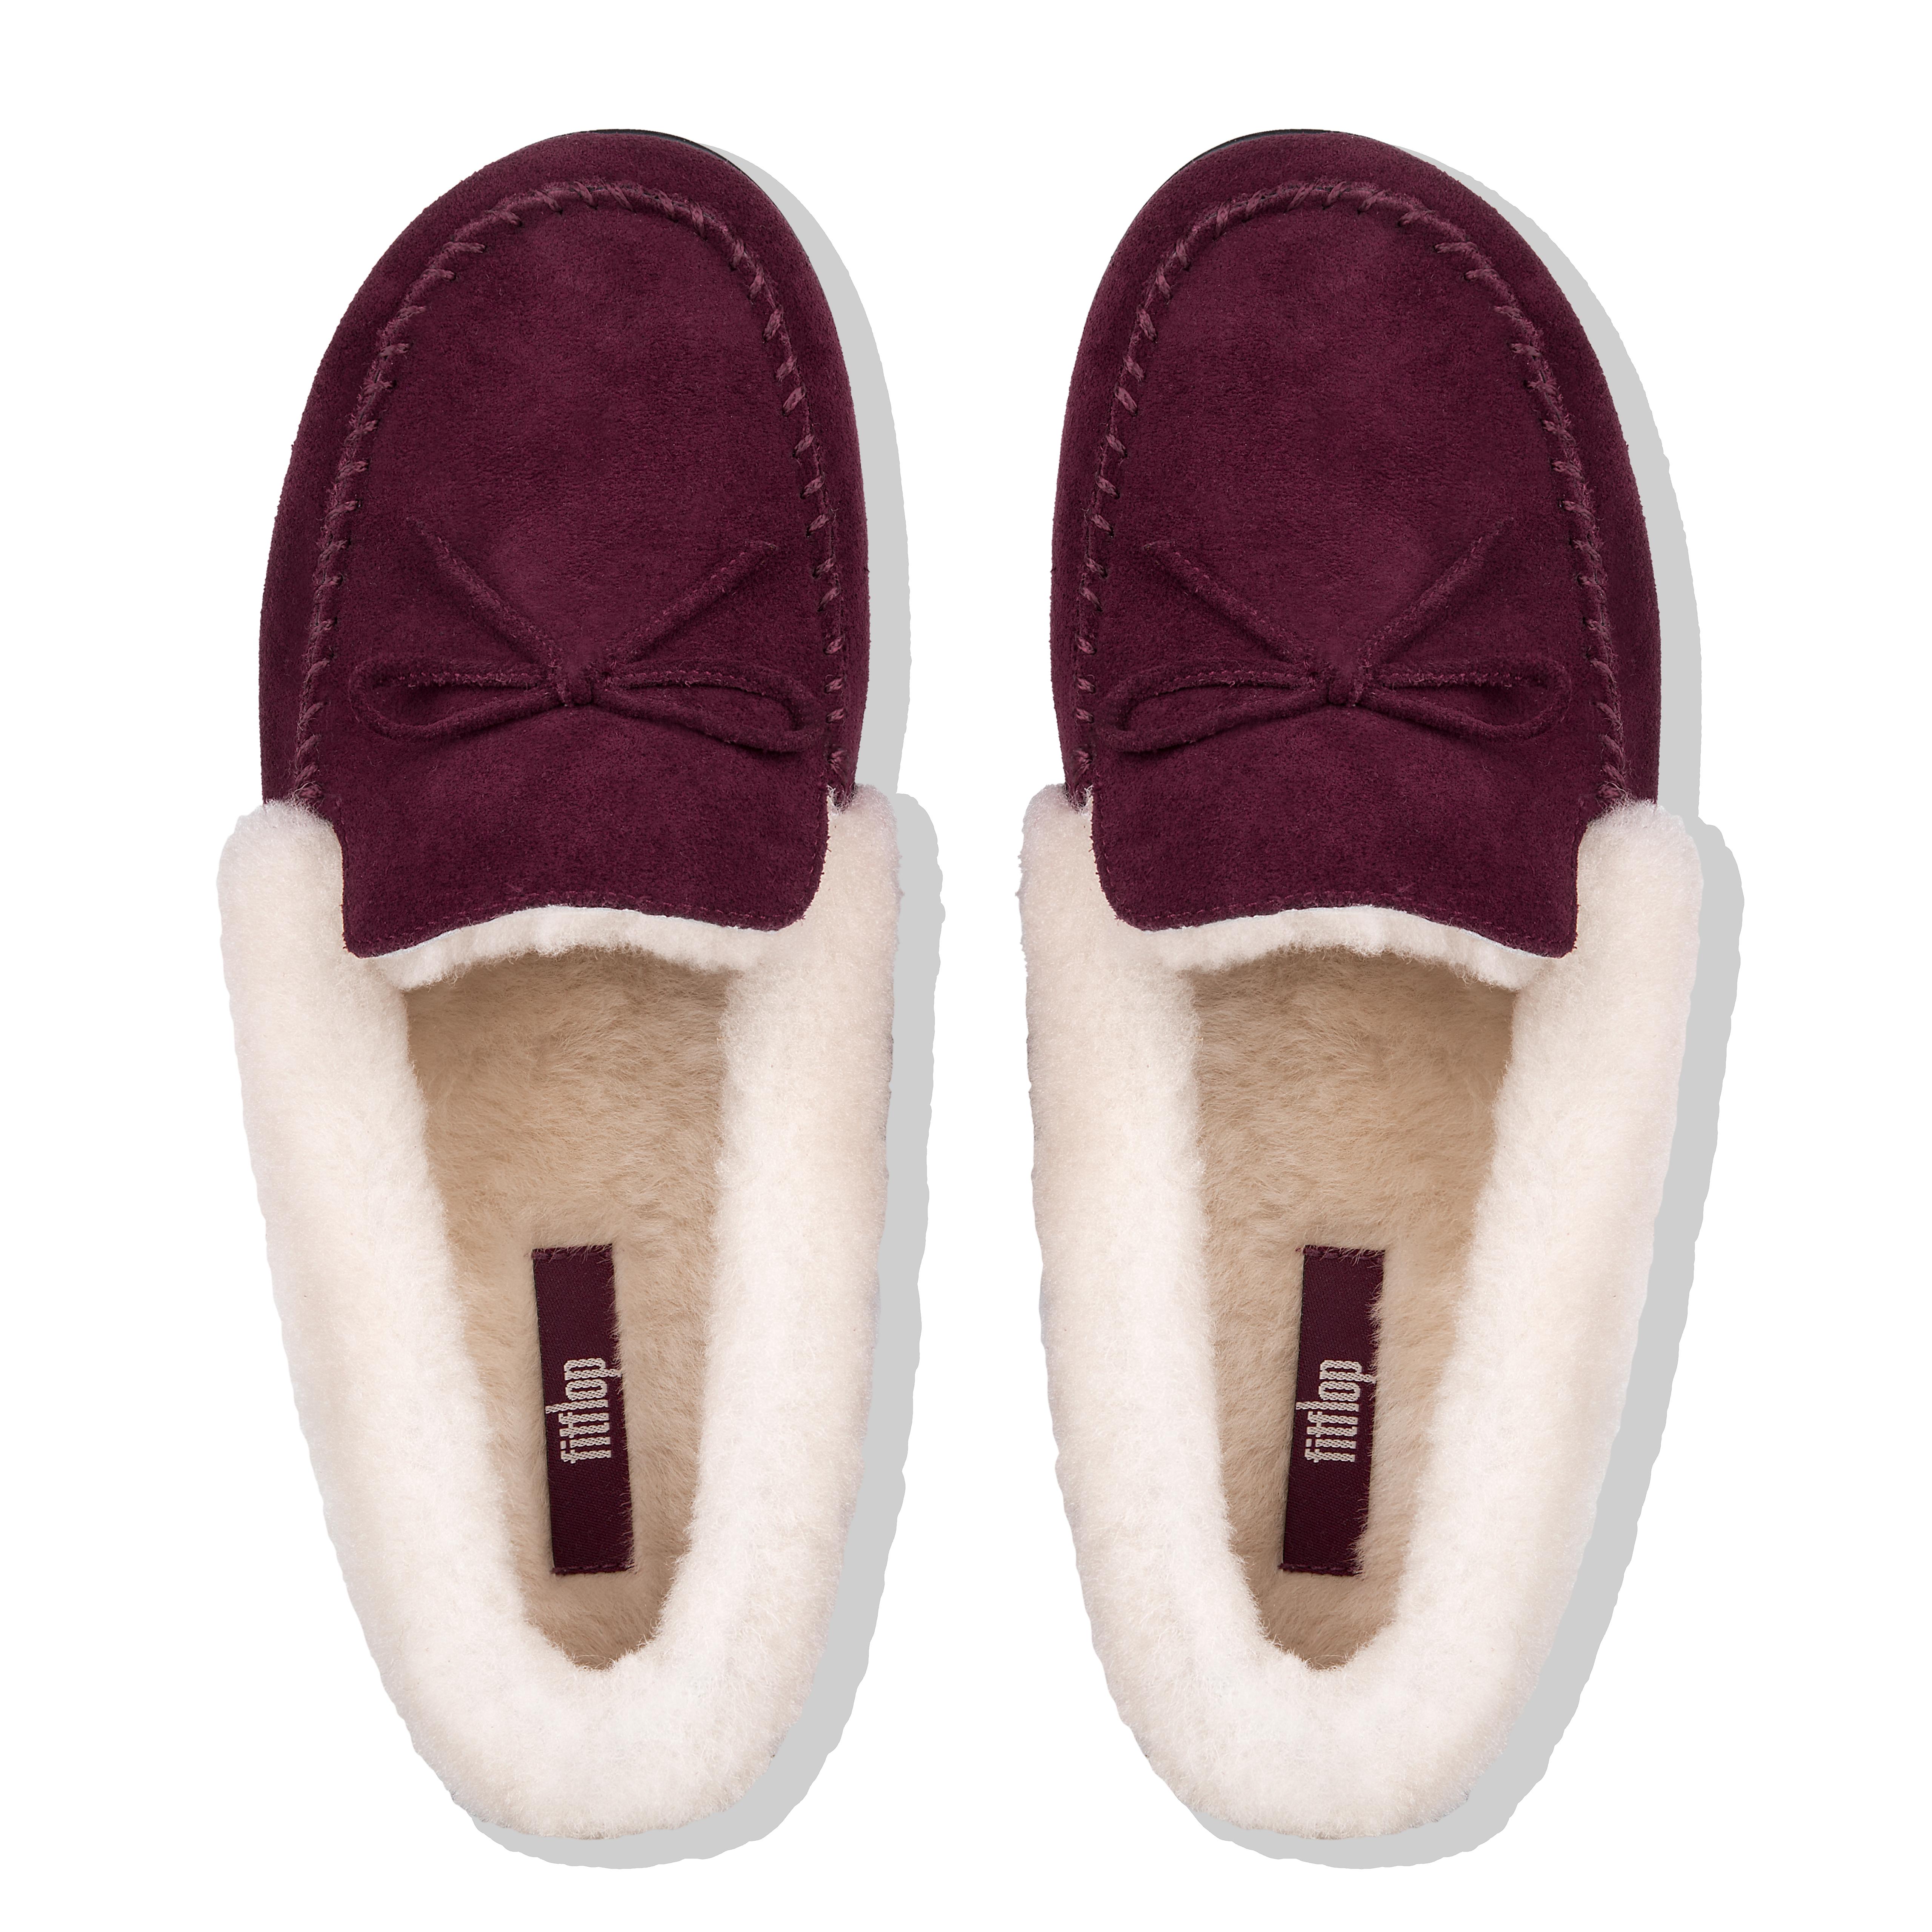 fitflop moccasin slippers